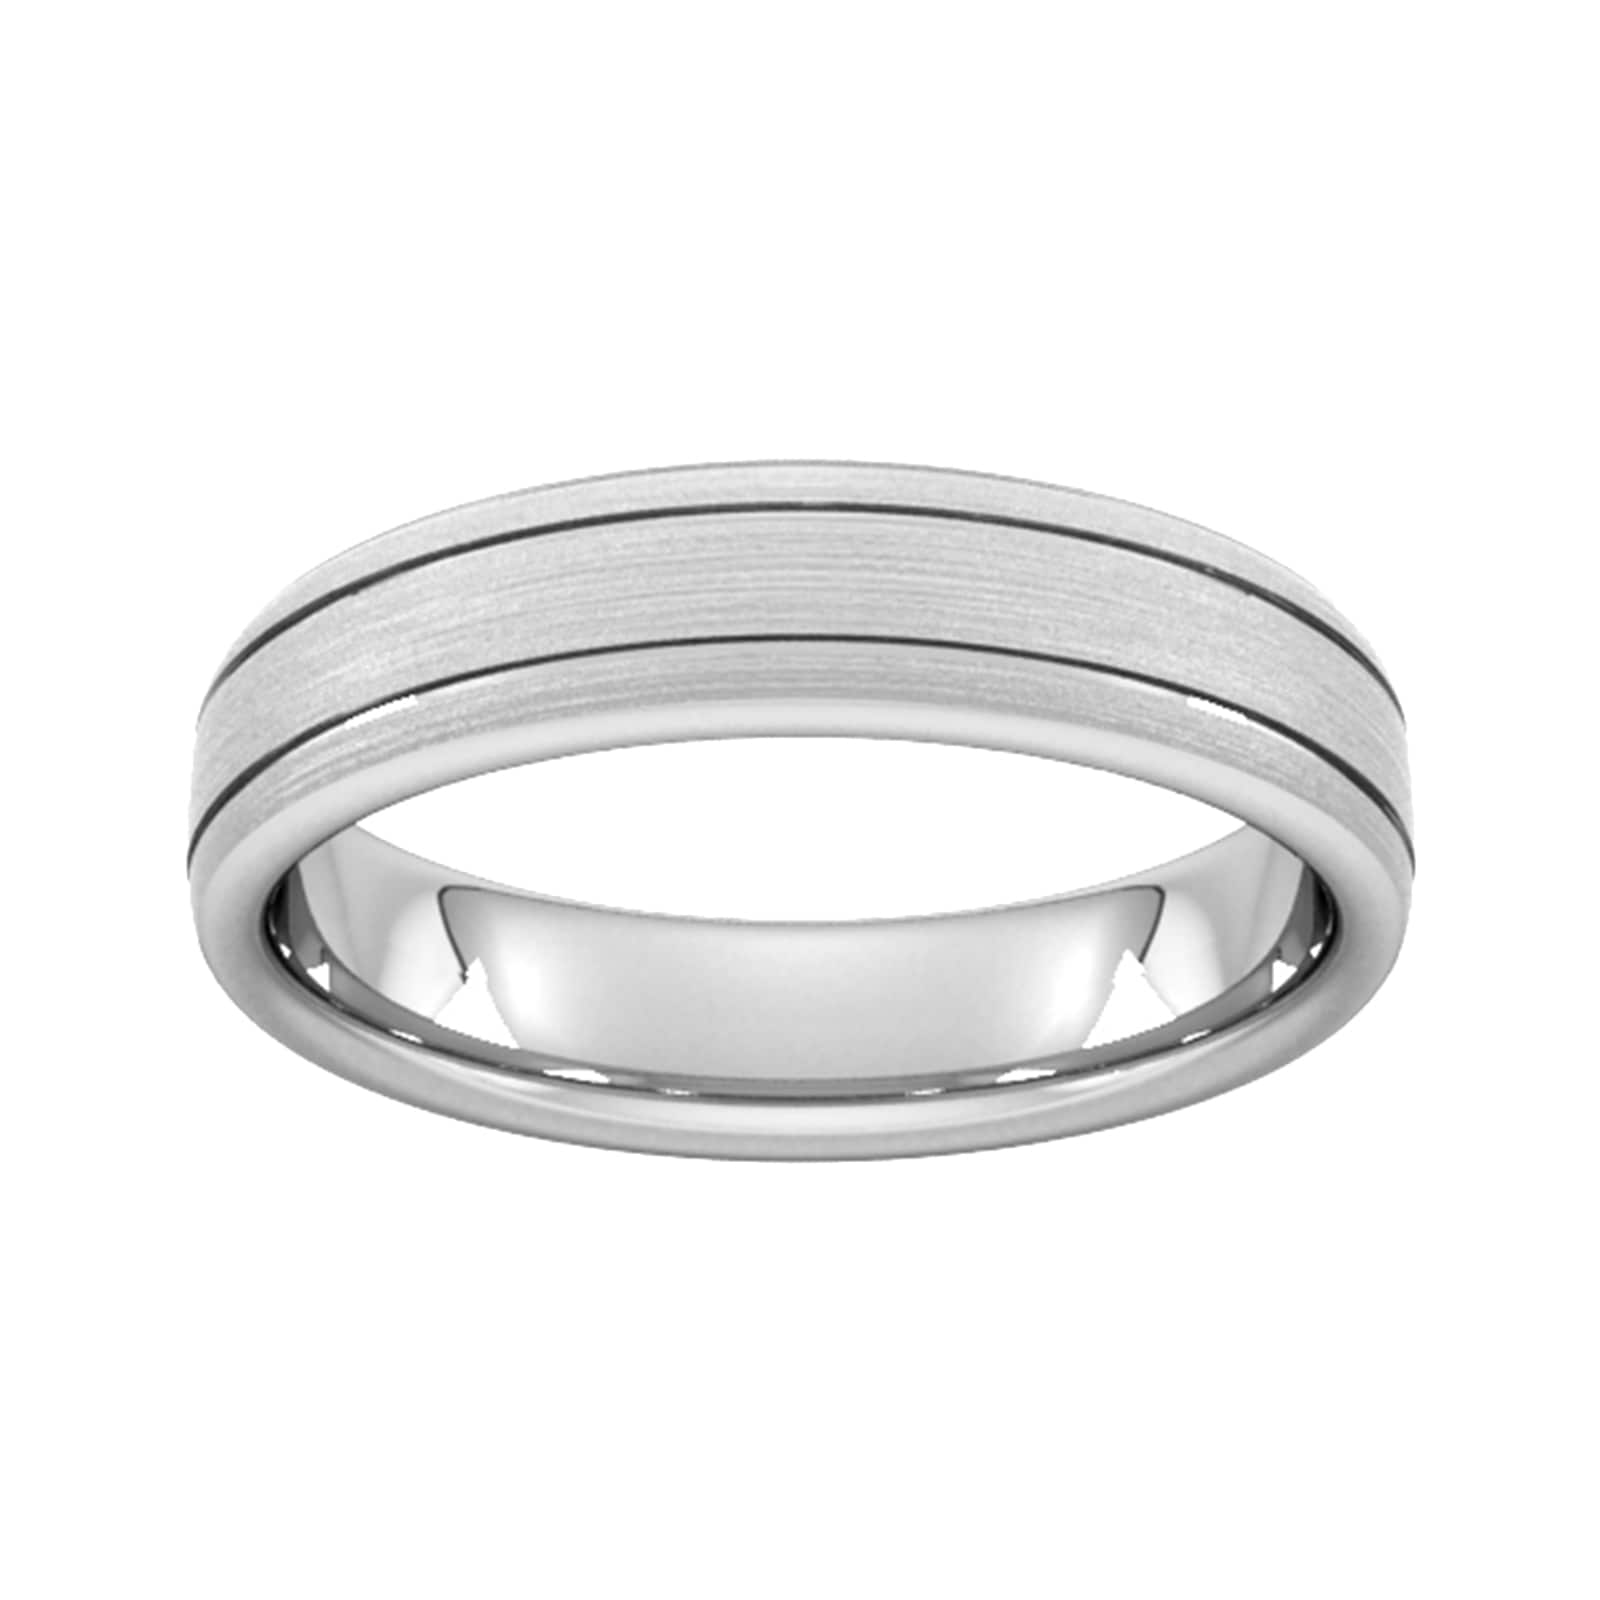 5mm Flat Court Heavy Matt Finish With Double Grooves Wedding Ring In 950 Palladium - Ring Size N